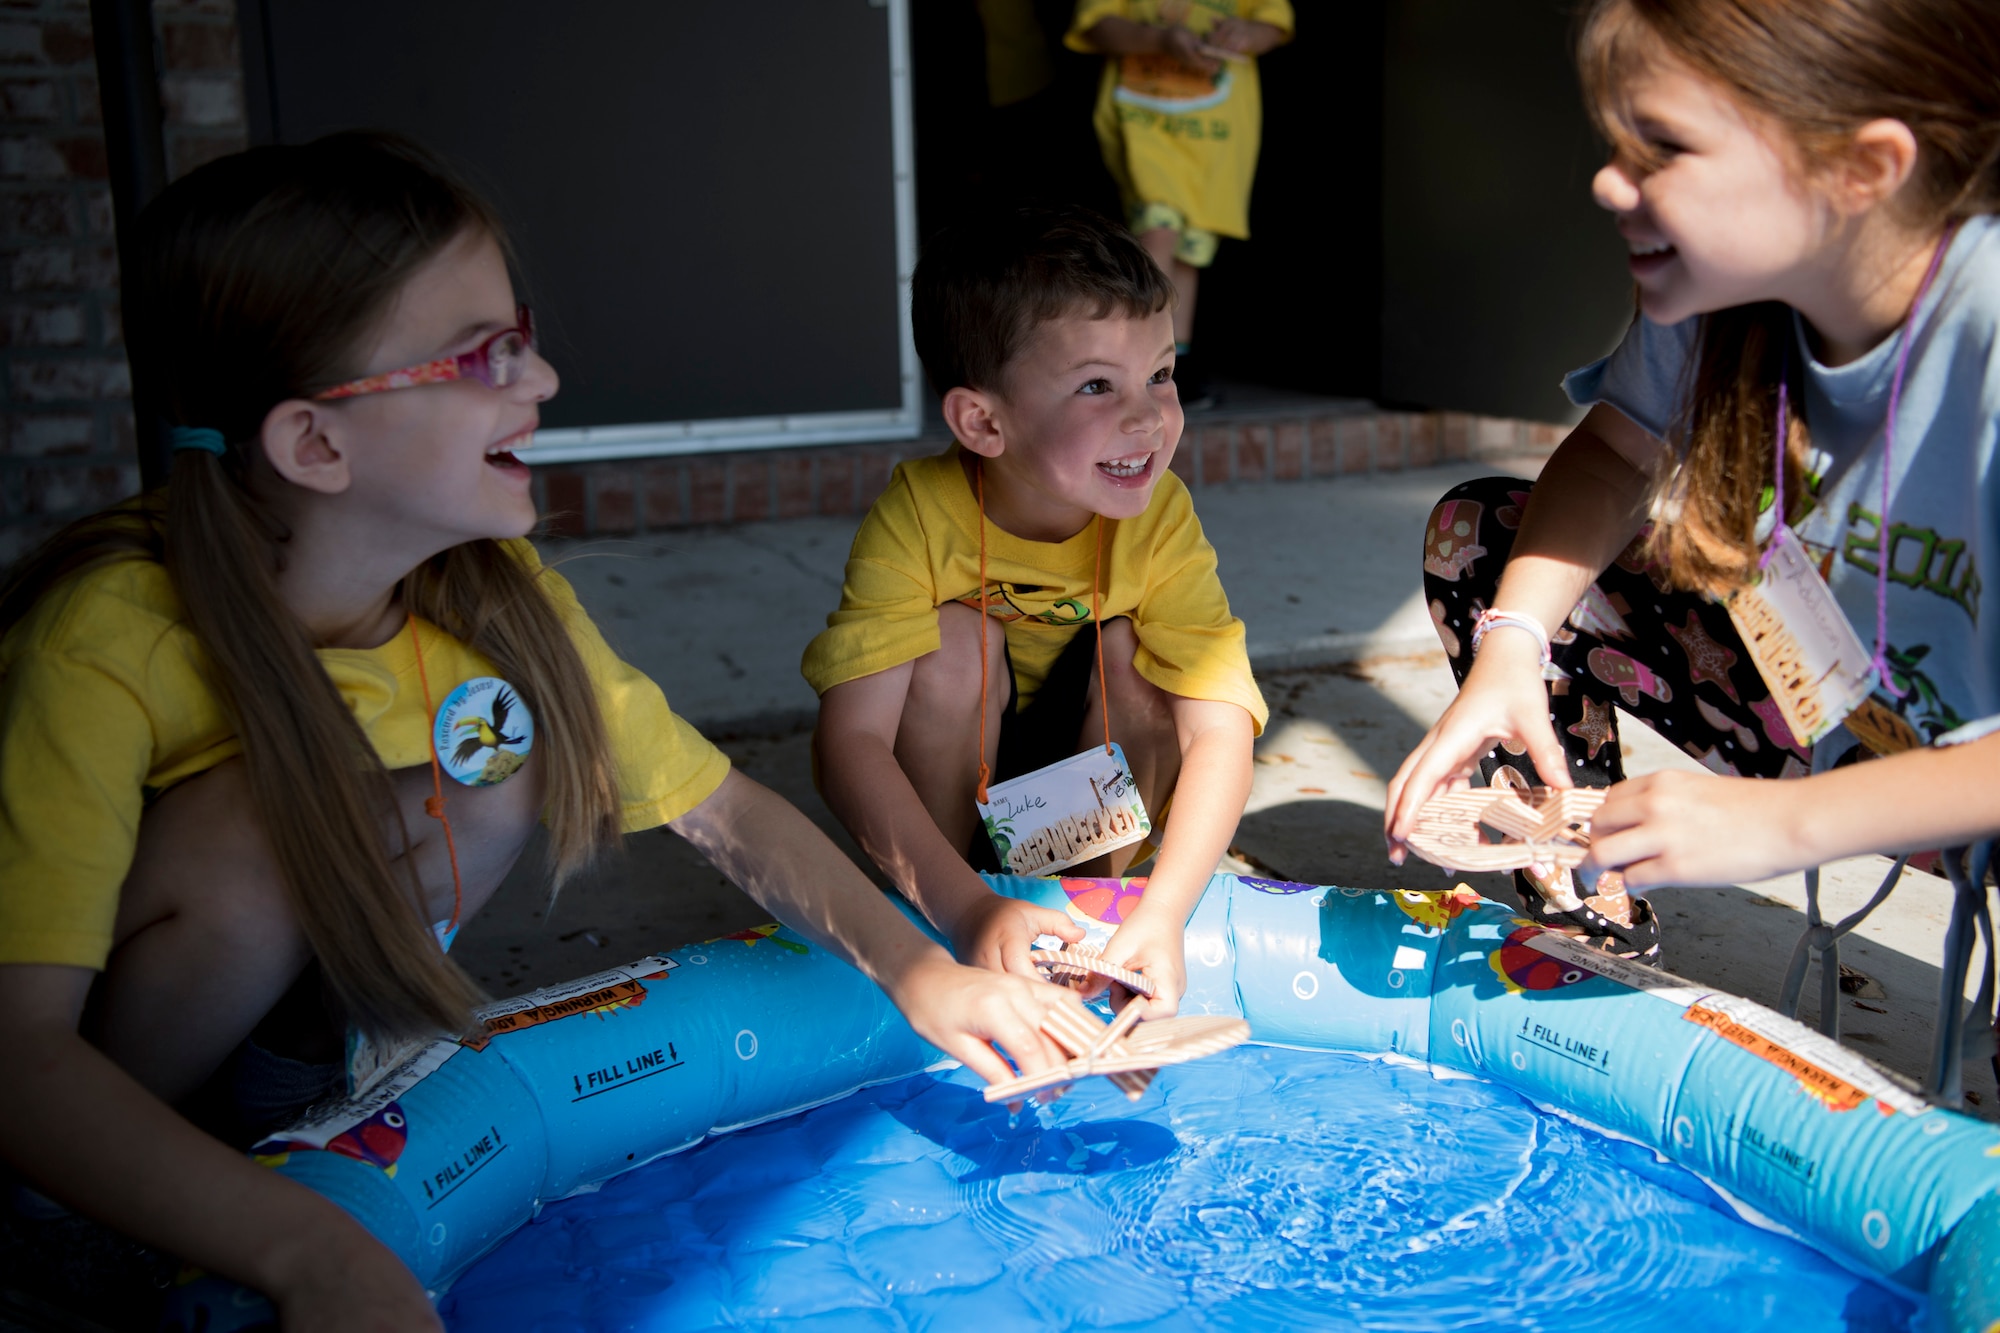 Children operate their arts and crafts projects in a small pool of water during the base chapel’s Vacation Bible School, June 8, 2018, at Moody Air Force Base, Ga. VBS is designed to assist children in building resiliency to the stressors many military families face. More than 95 children and 65 volunteers attended this year’s VBS. (U.S. Air Force photo by Senior Airman Daniel Snider)